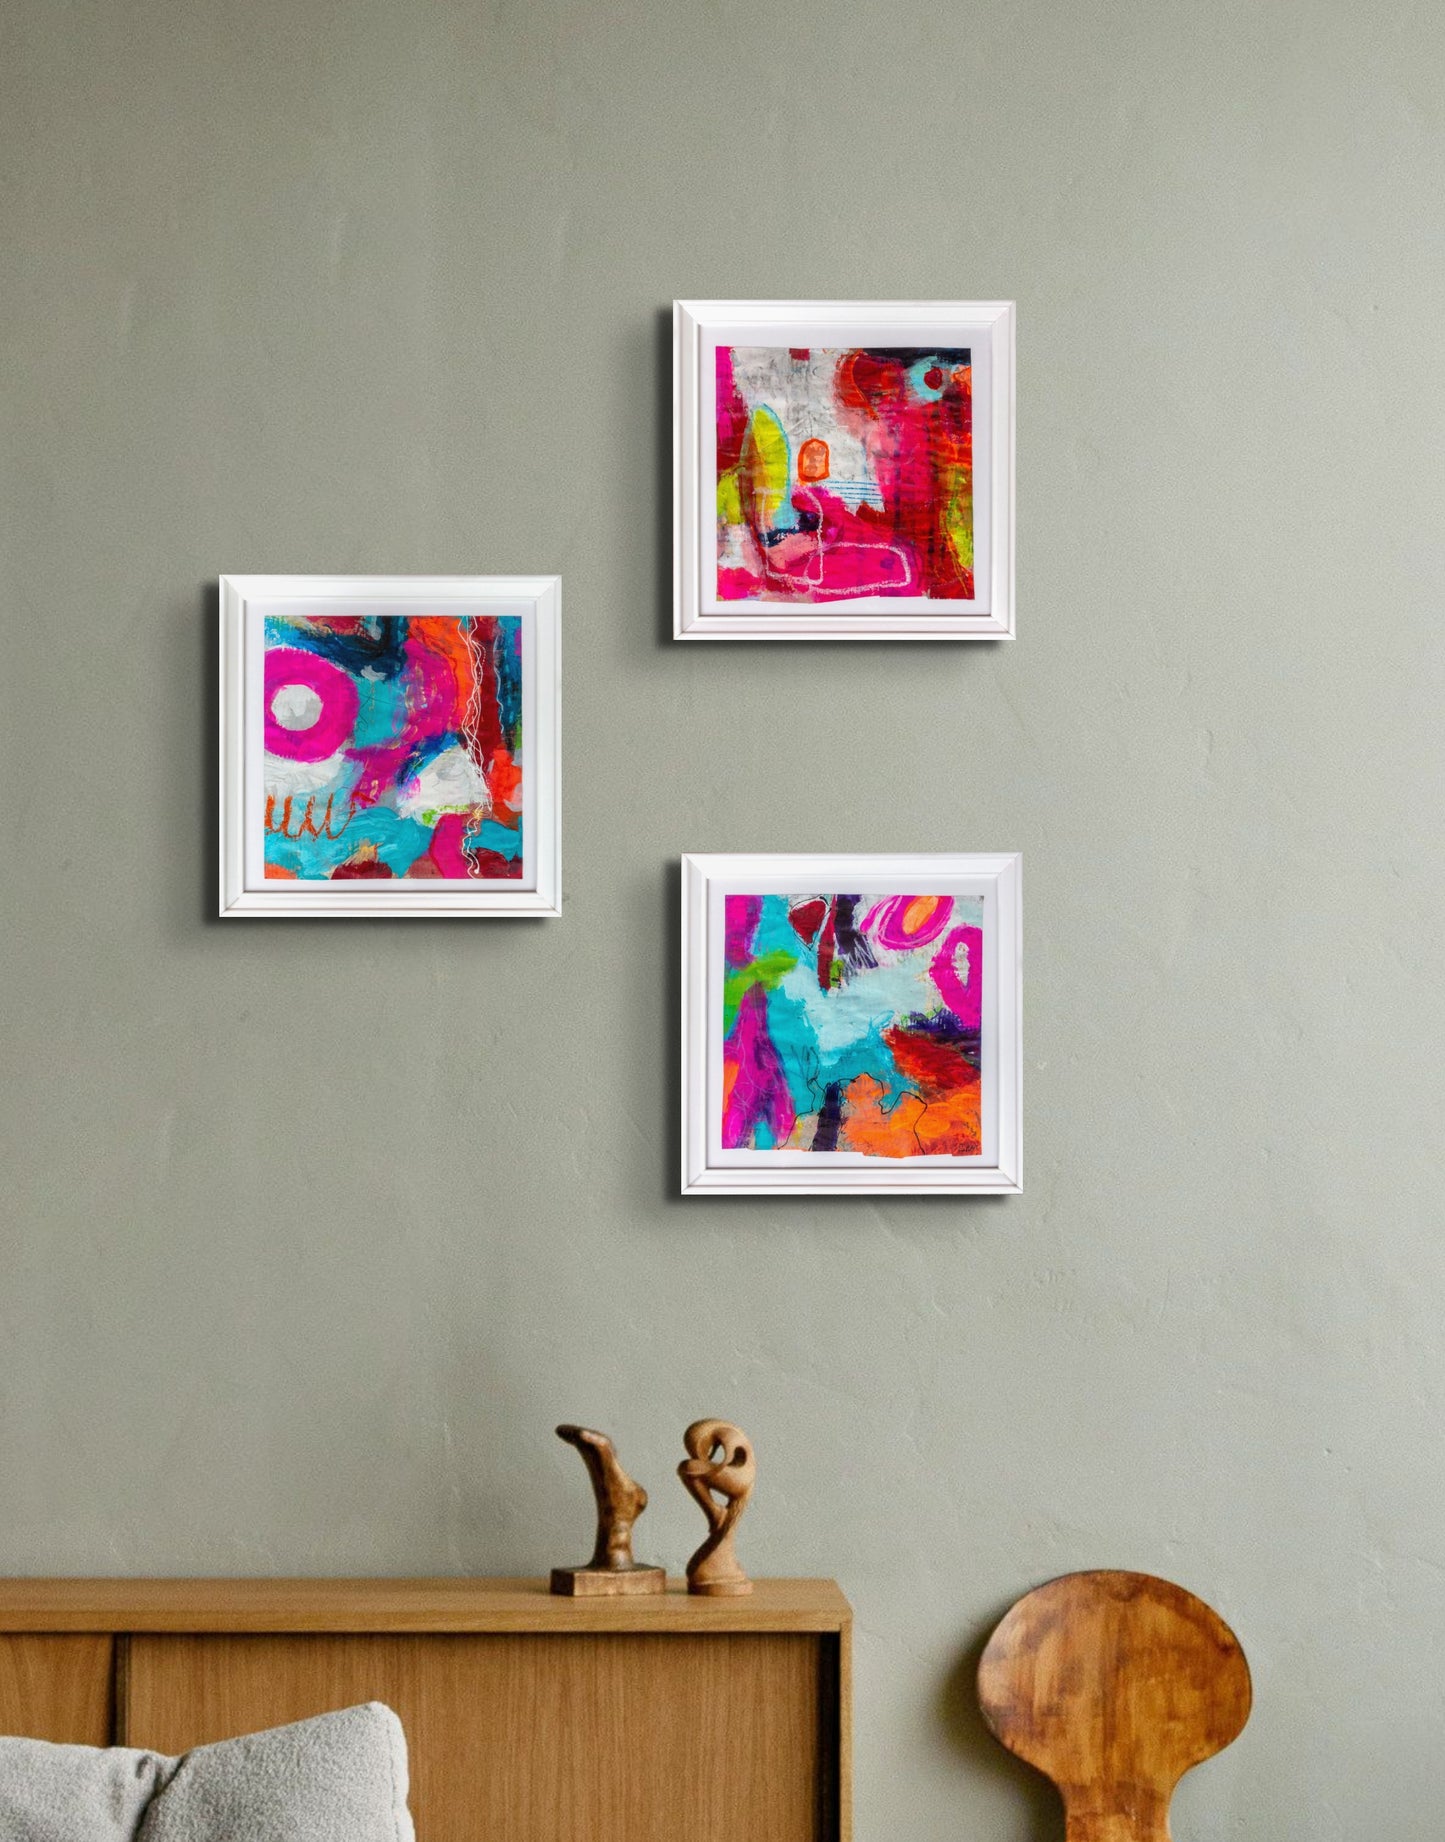 Colorful acrylic abstract painting on paper titled 'Part of the Whole #4' by artist Steffi Möllers; measures app 7.5"x7.5"; w/frame measures 10"x10"; image is shown in situ on wall with two add'l abstract paintings by same artist.